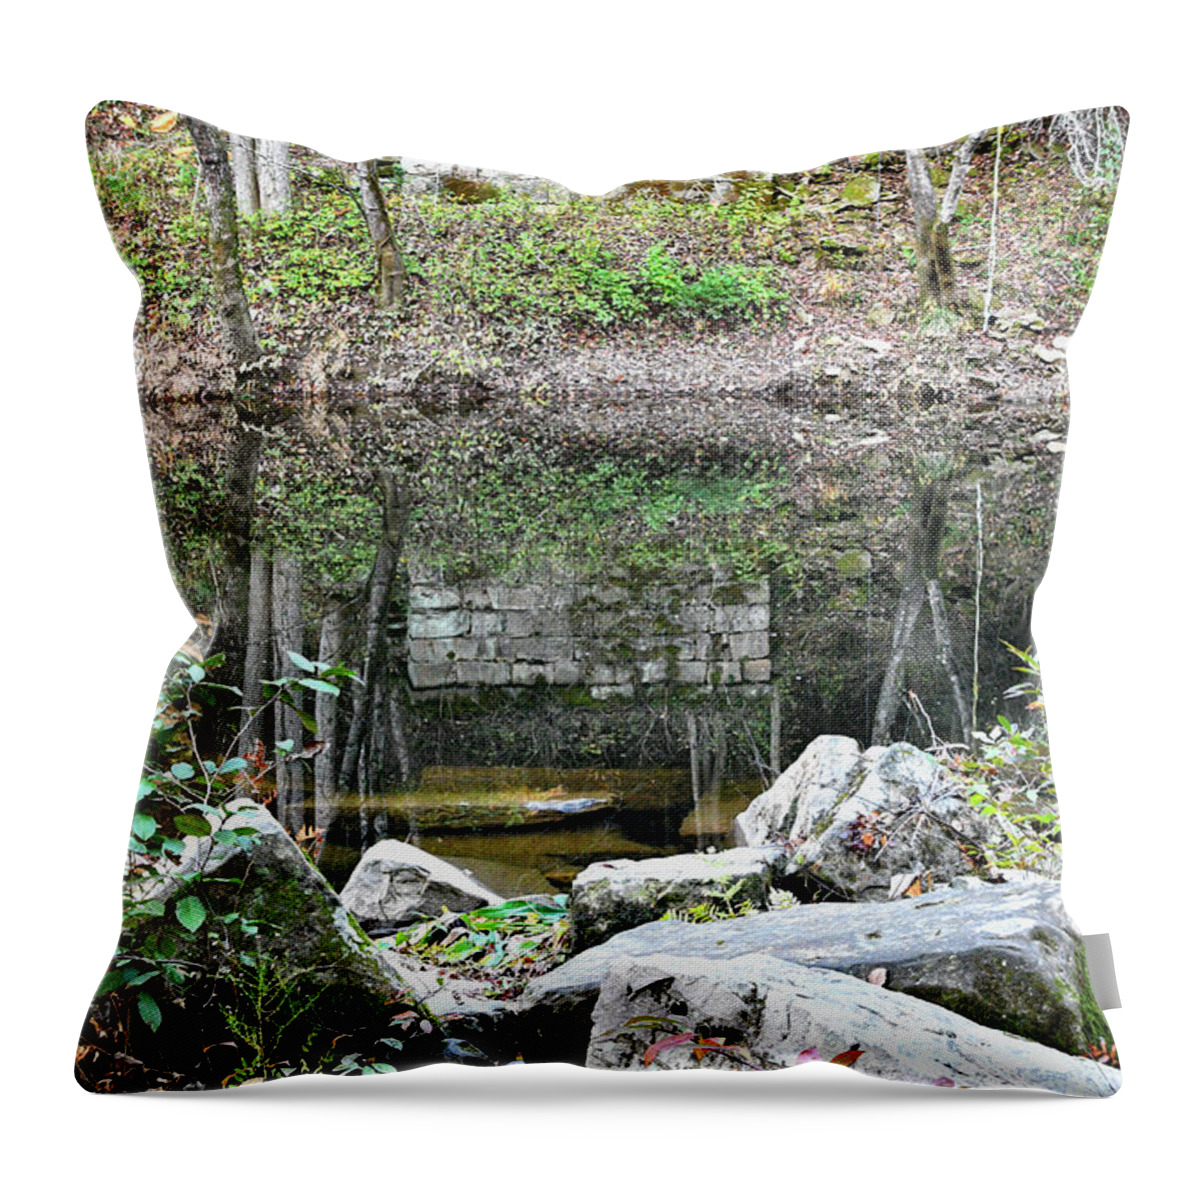 Tennessee Throw Pillow featuring the photograph Jett Bridge 5 by Phil Perkins